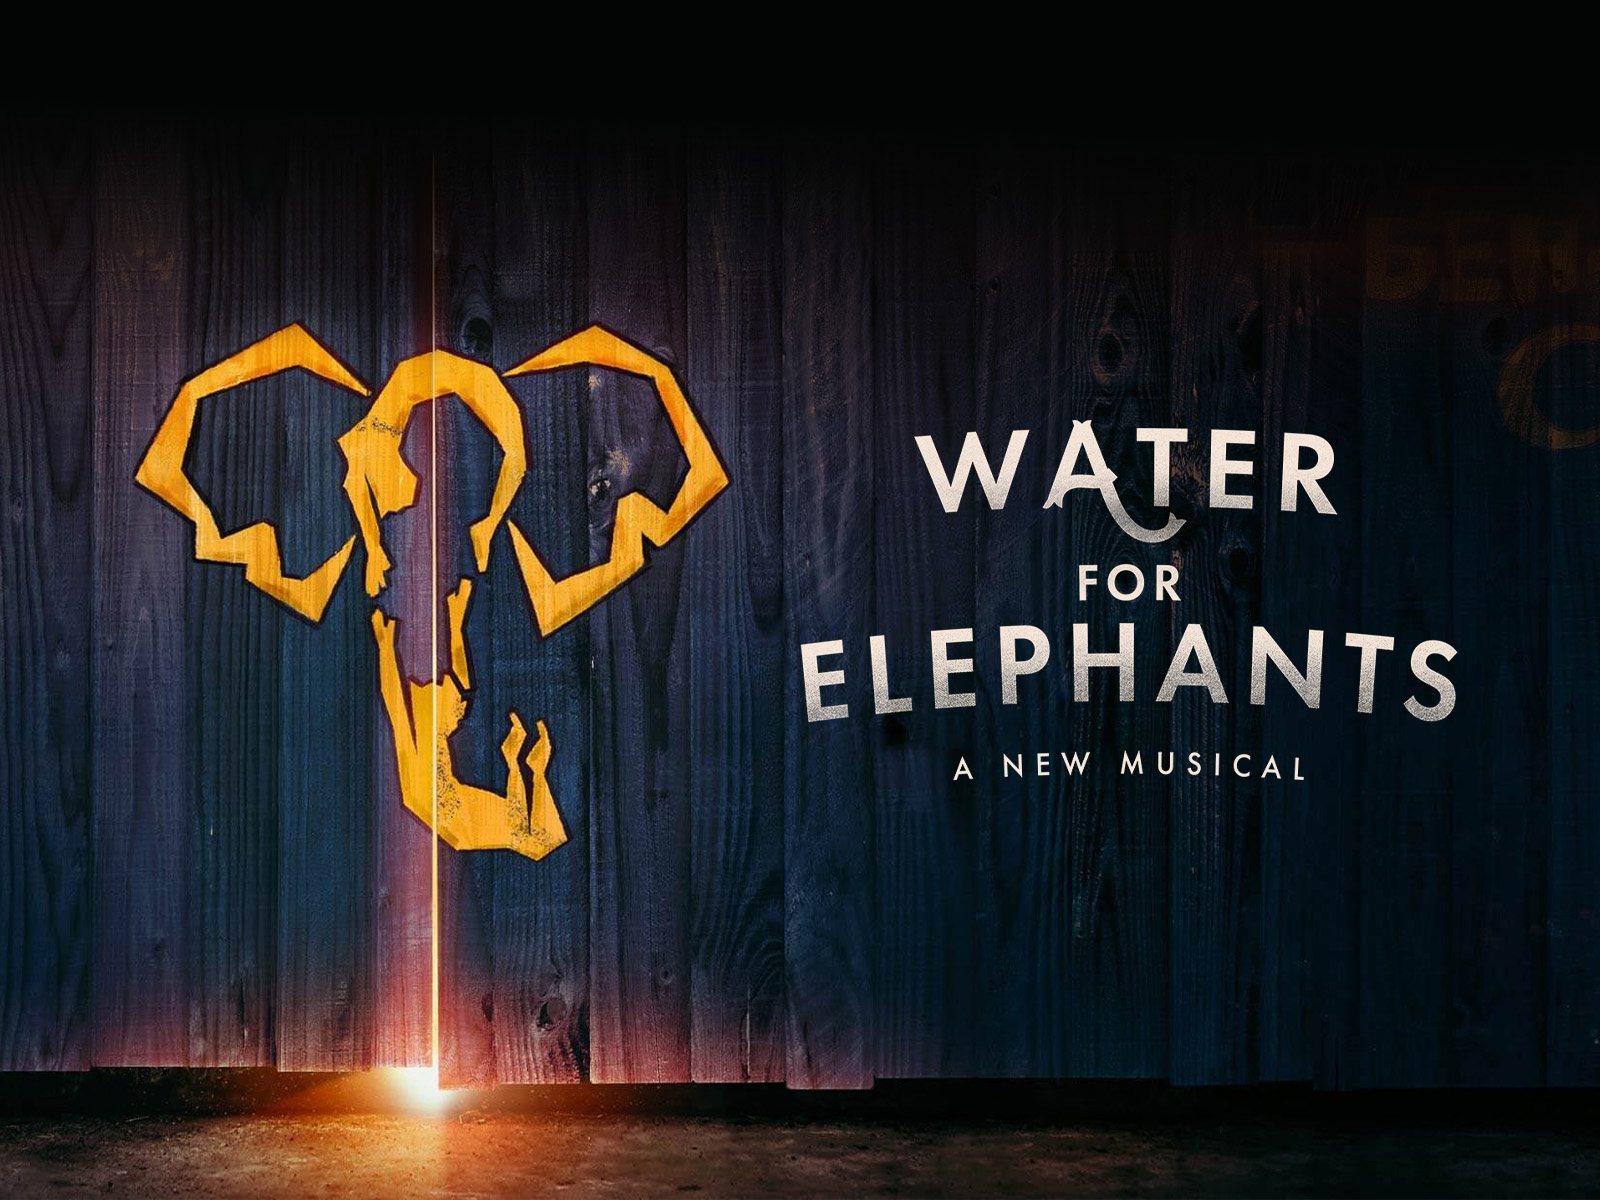 Water for elephants musical